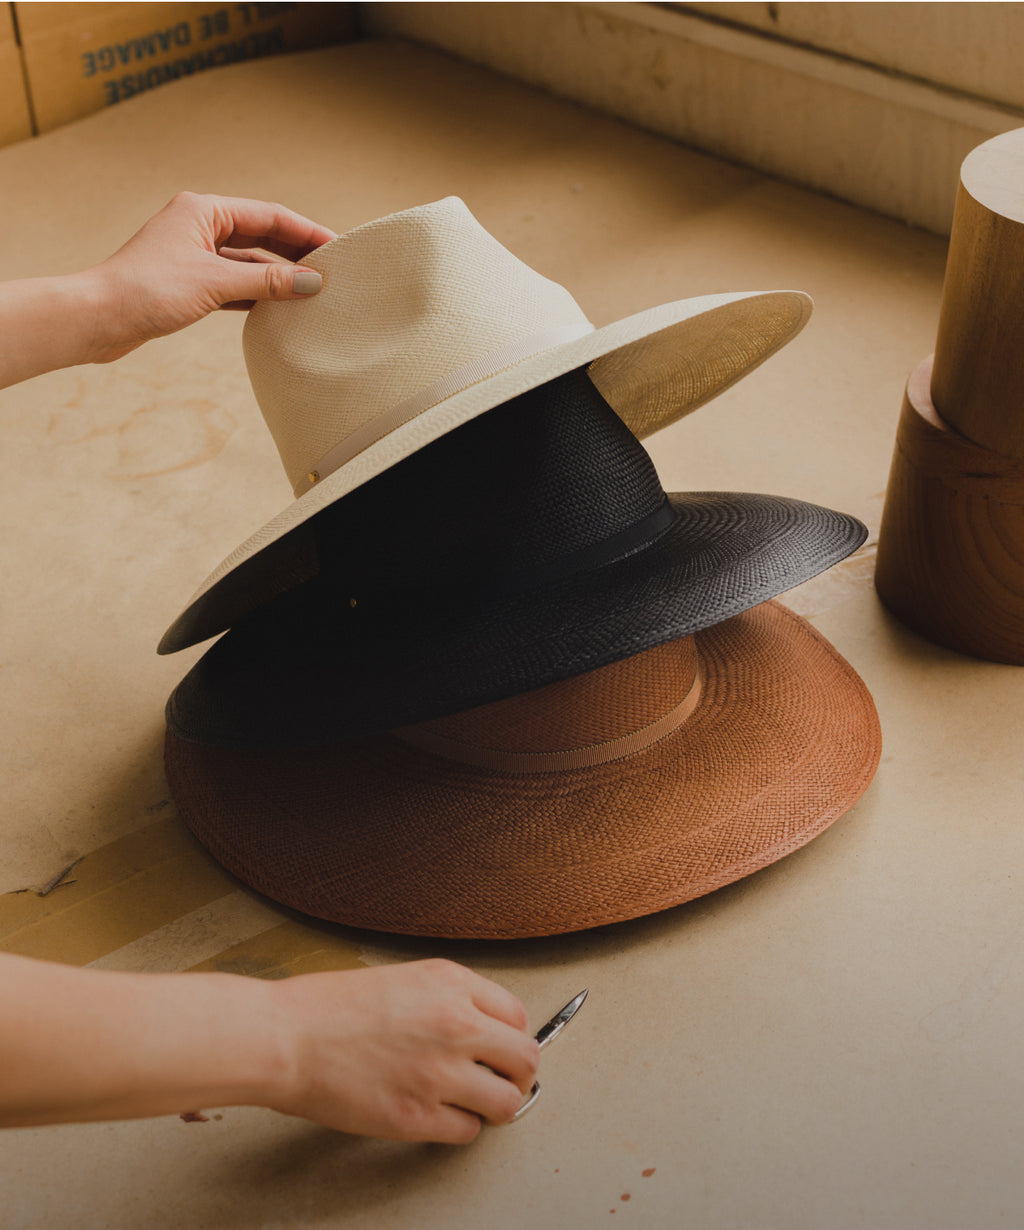 Three hats stacked, with a hand arranging the top one in a light room.